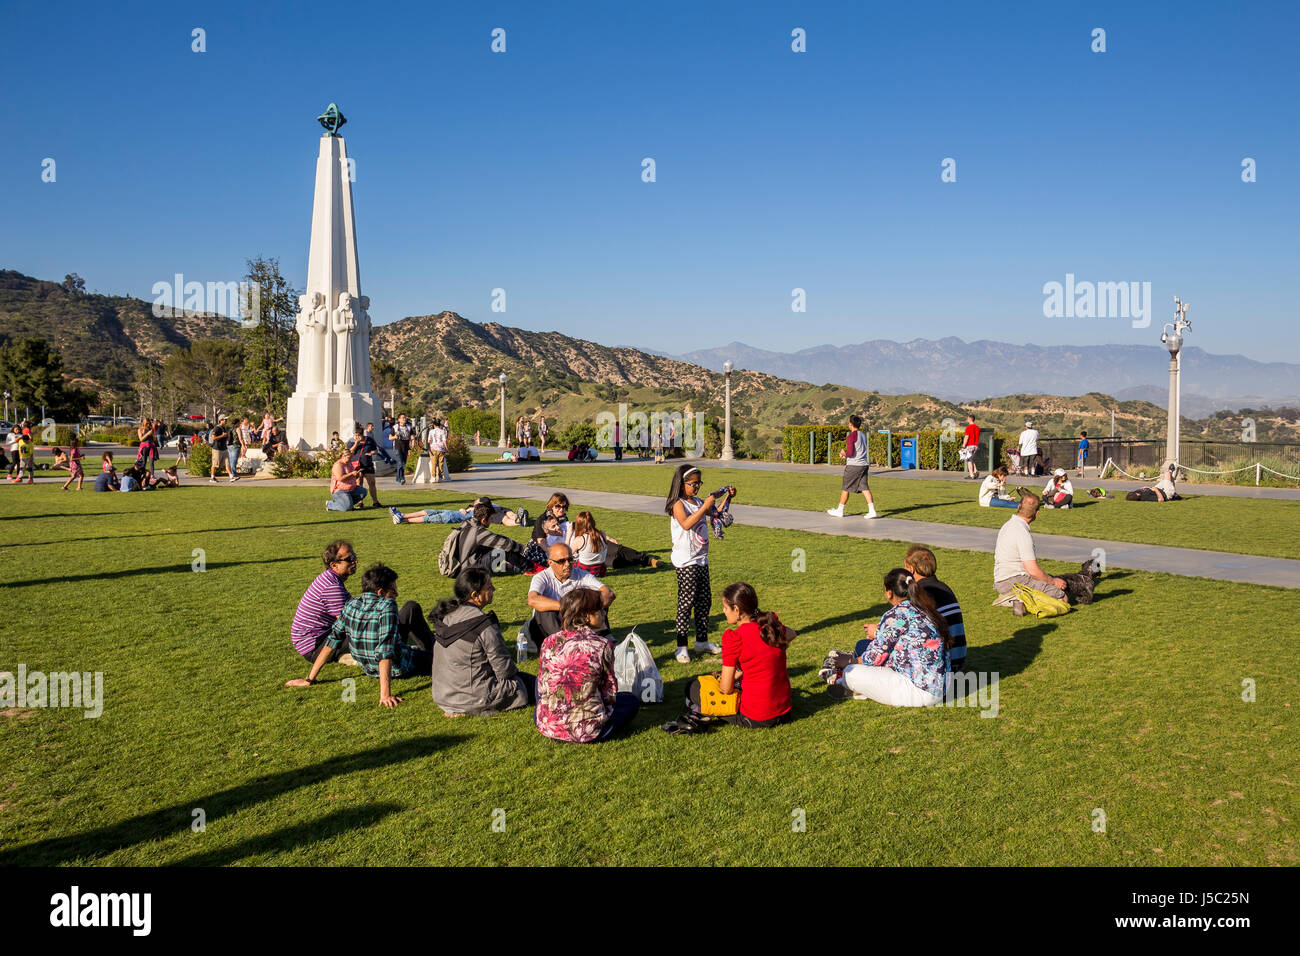 people, tourists, lawn, observatory grounds, Astronomers Monument, Griffith Observatory, Griffith Park, Los Angeles, California Stock Photo